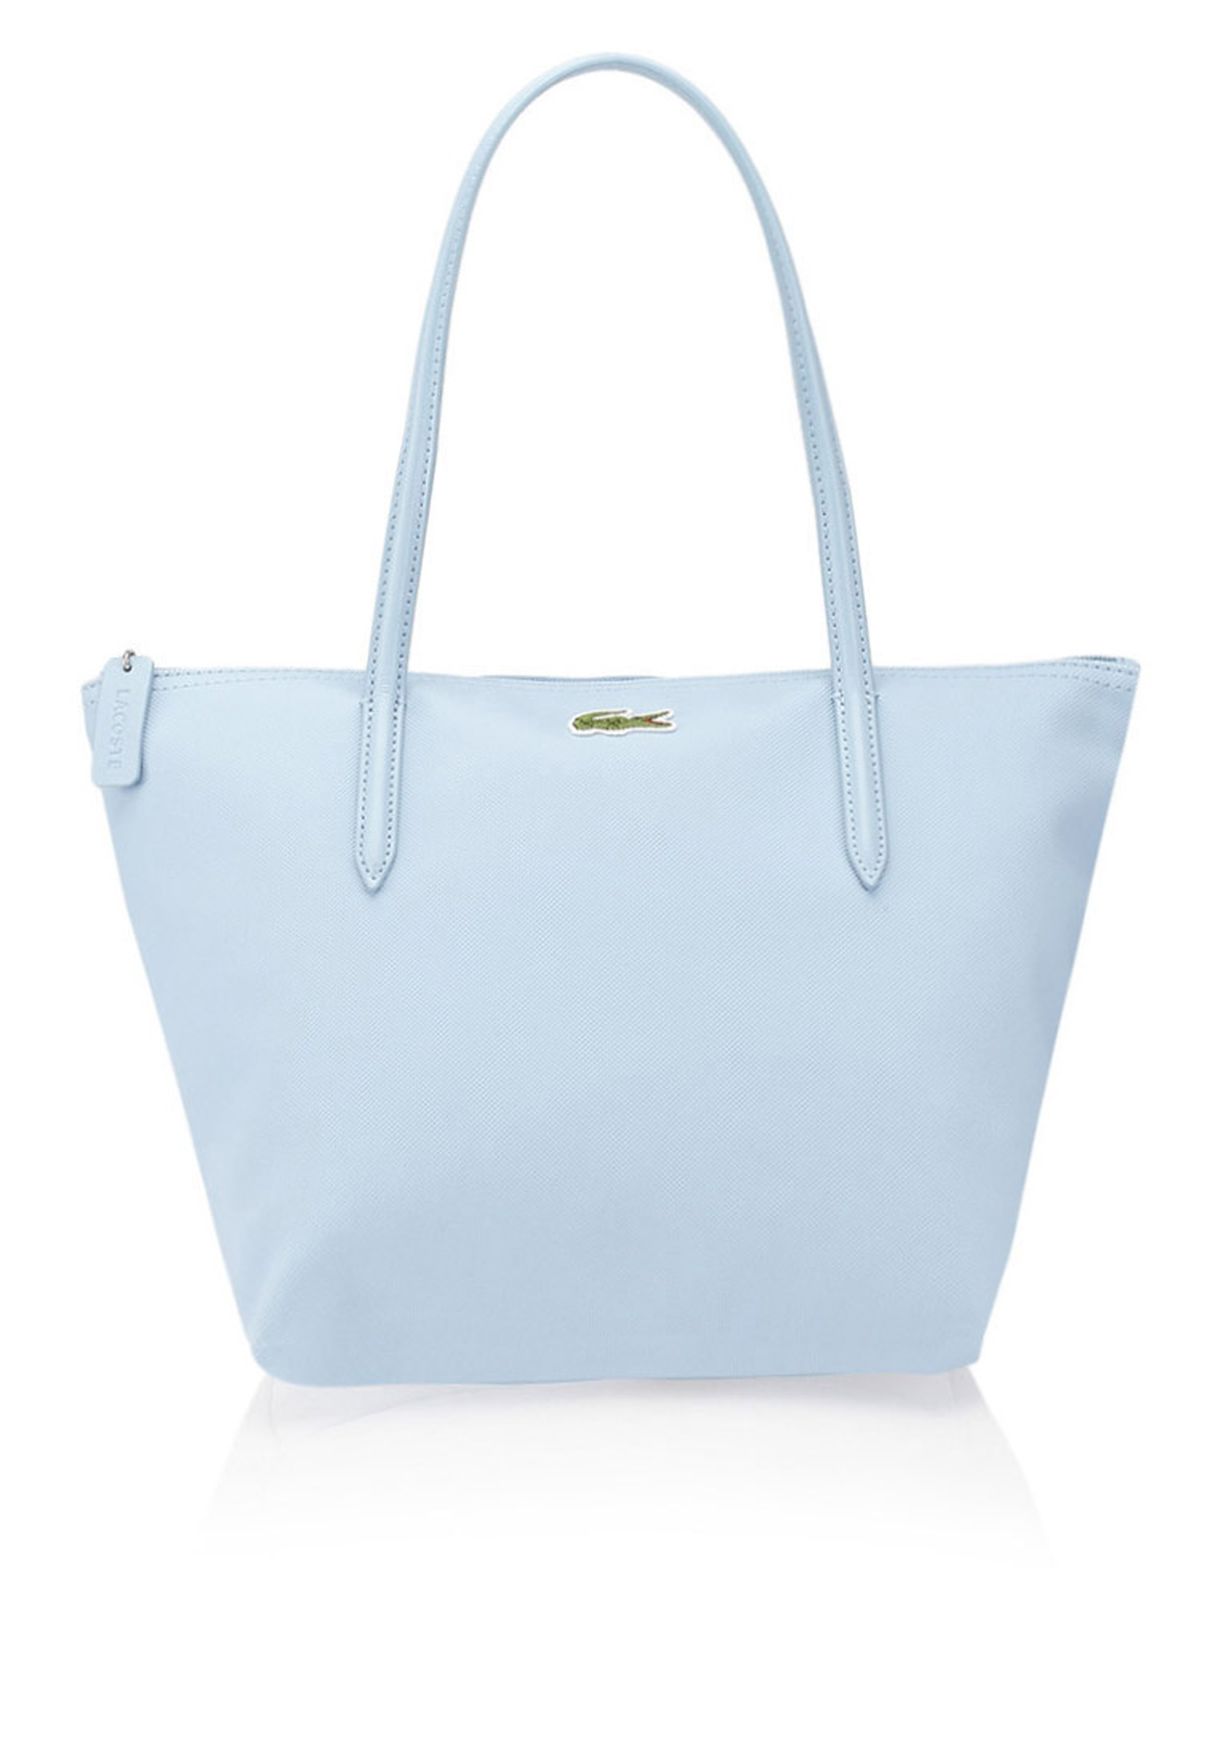 lacoste small shopping bag